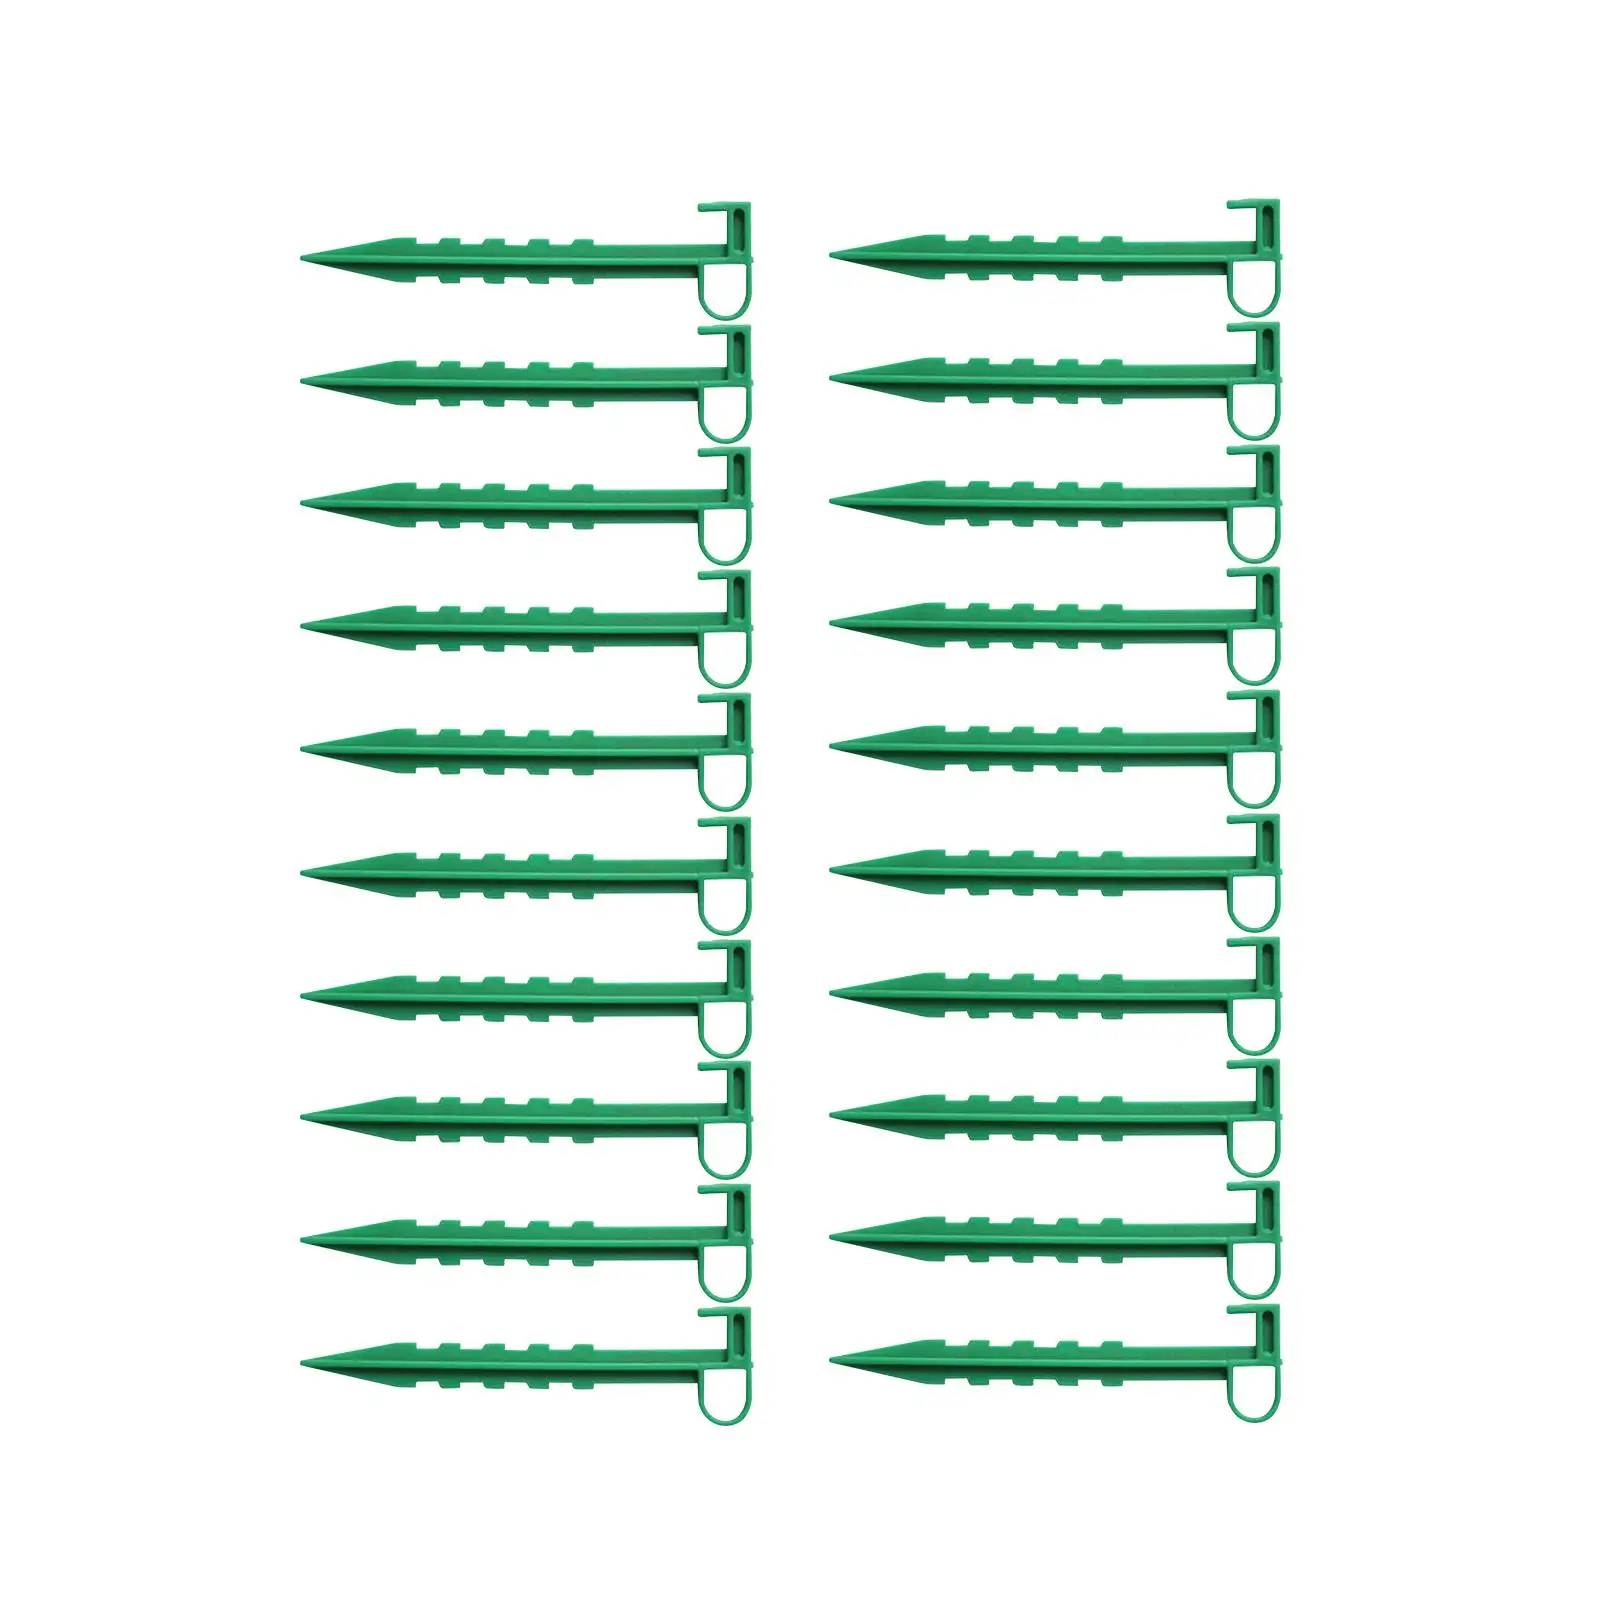 20Pcs Garden Stakes Ground Stakes Yard Fixing Anchor Pegs Garden Anchor Pegs for Keeping Garden Netting Down Tents Securing